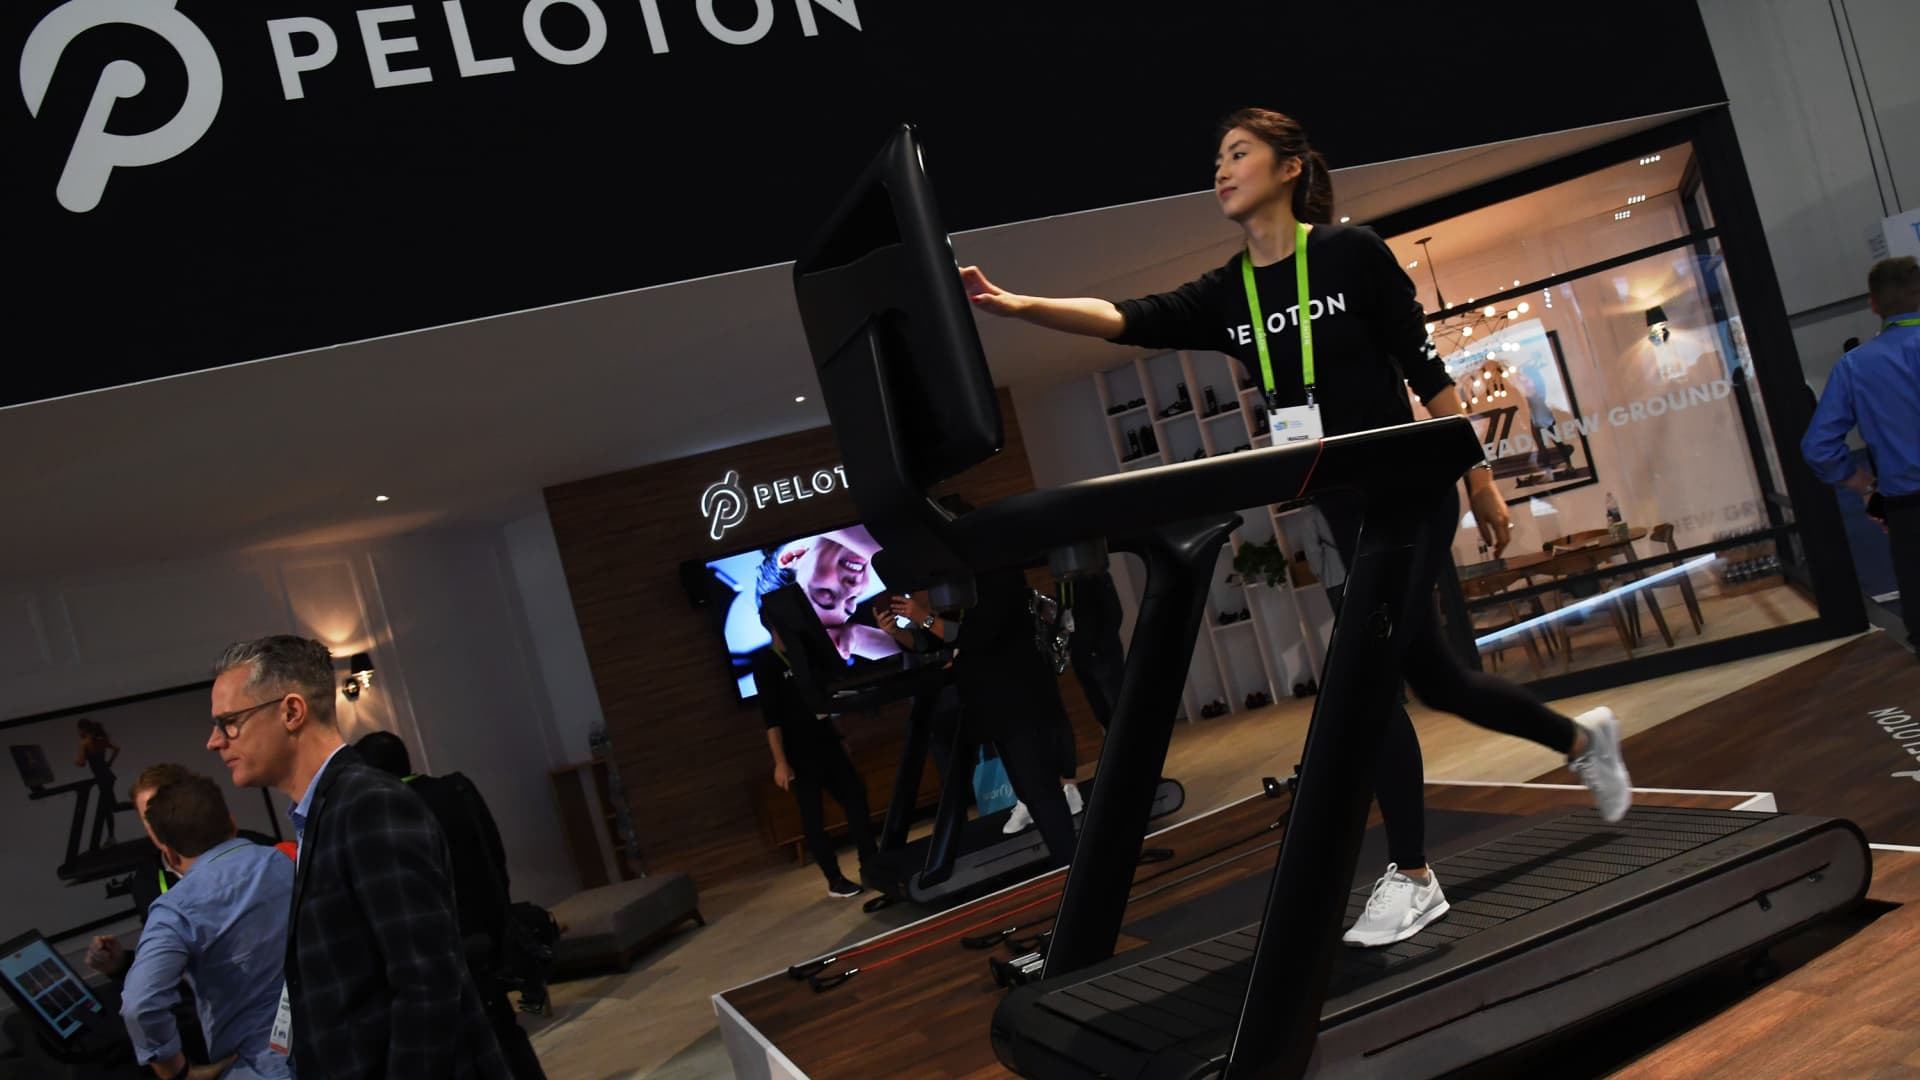 Maggie Lu uses a Peloton Tread treadmill during CES 2018 at the Las Vegas Convention Center on January 11, 2018 in Las Vegas, Nevada.